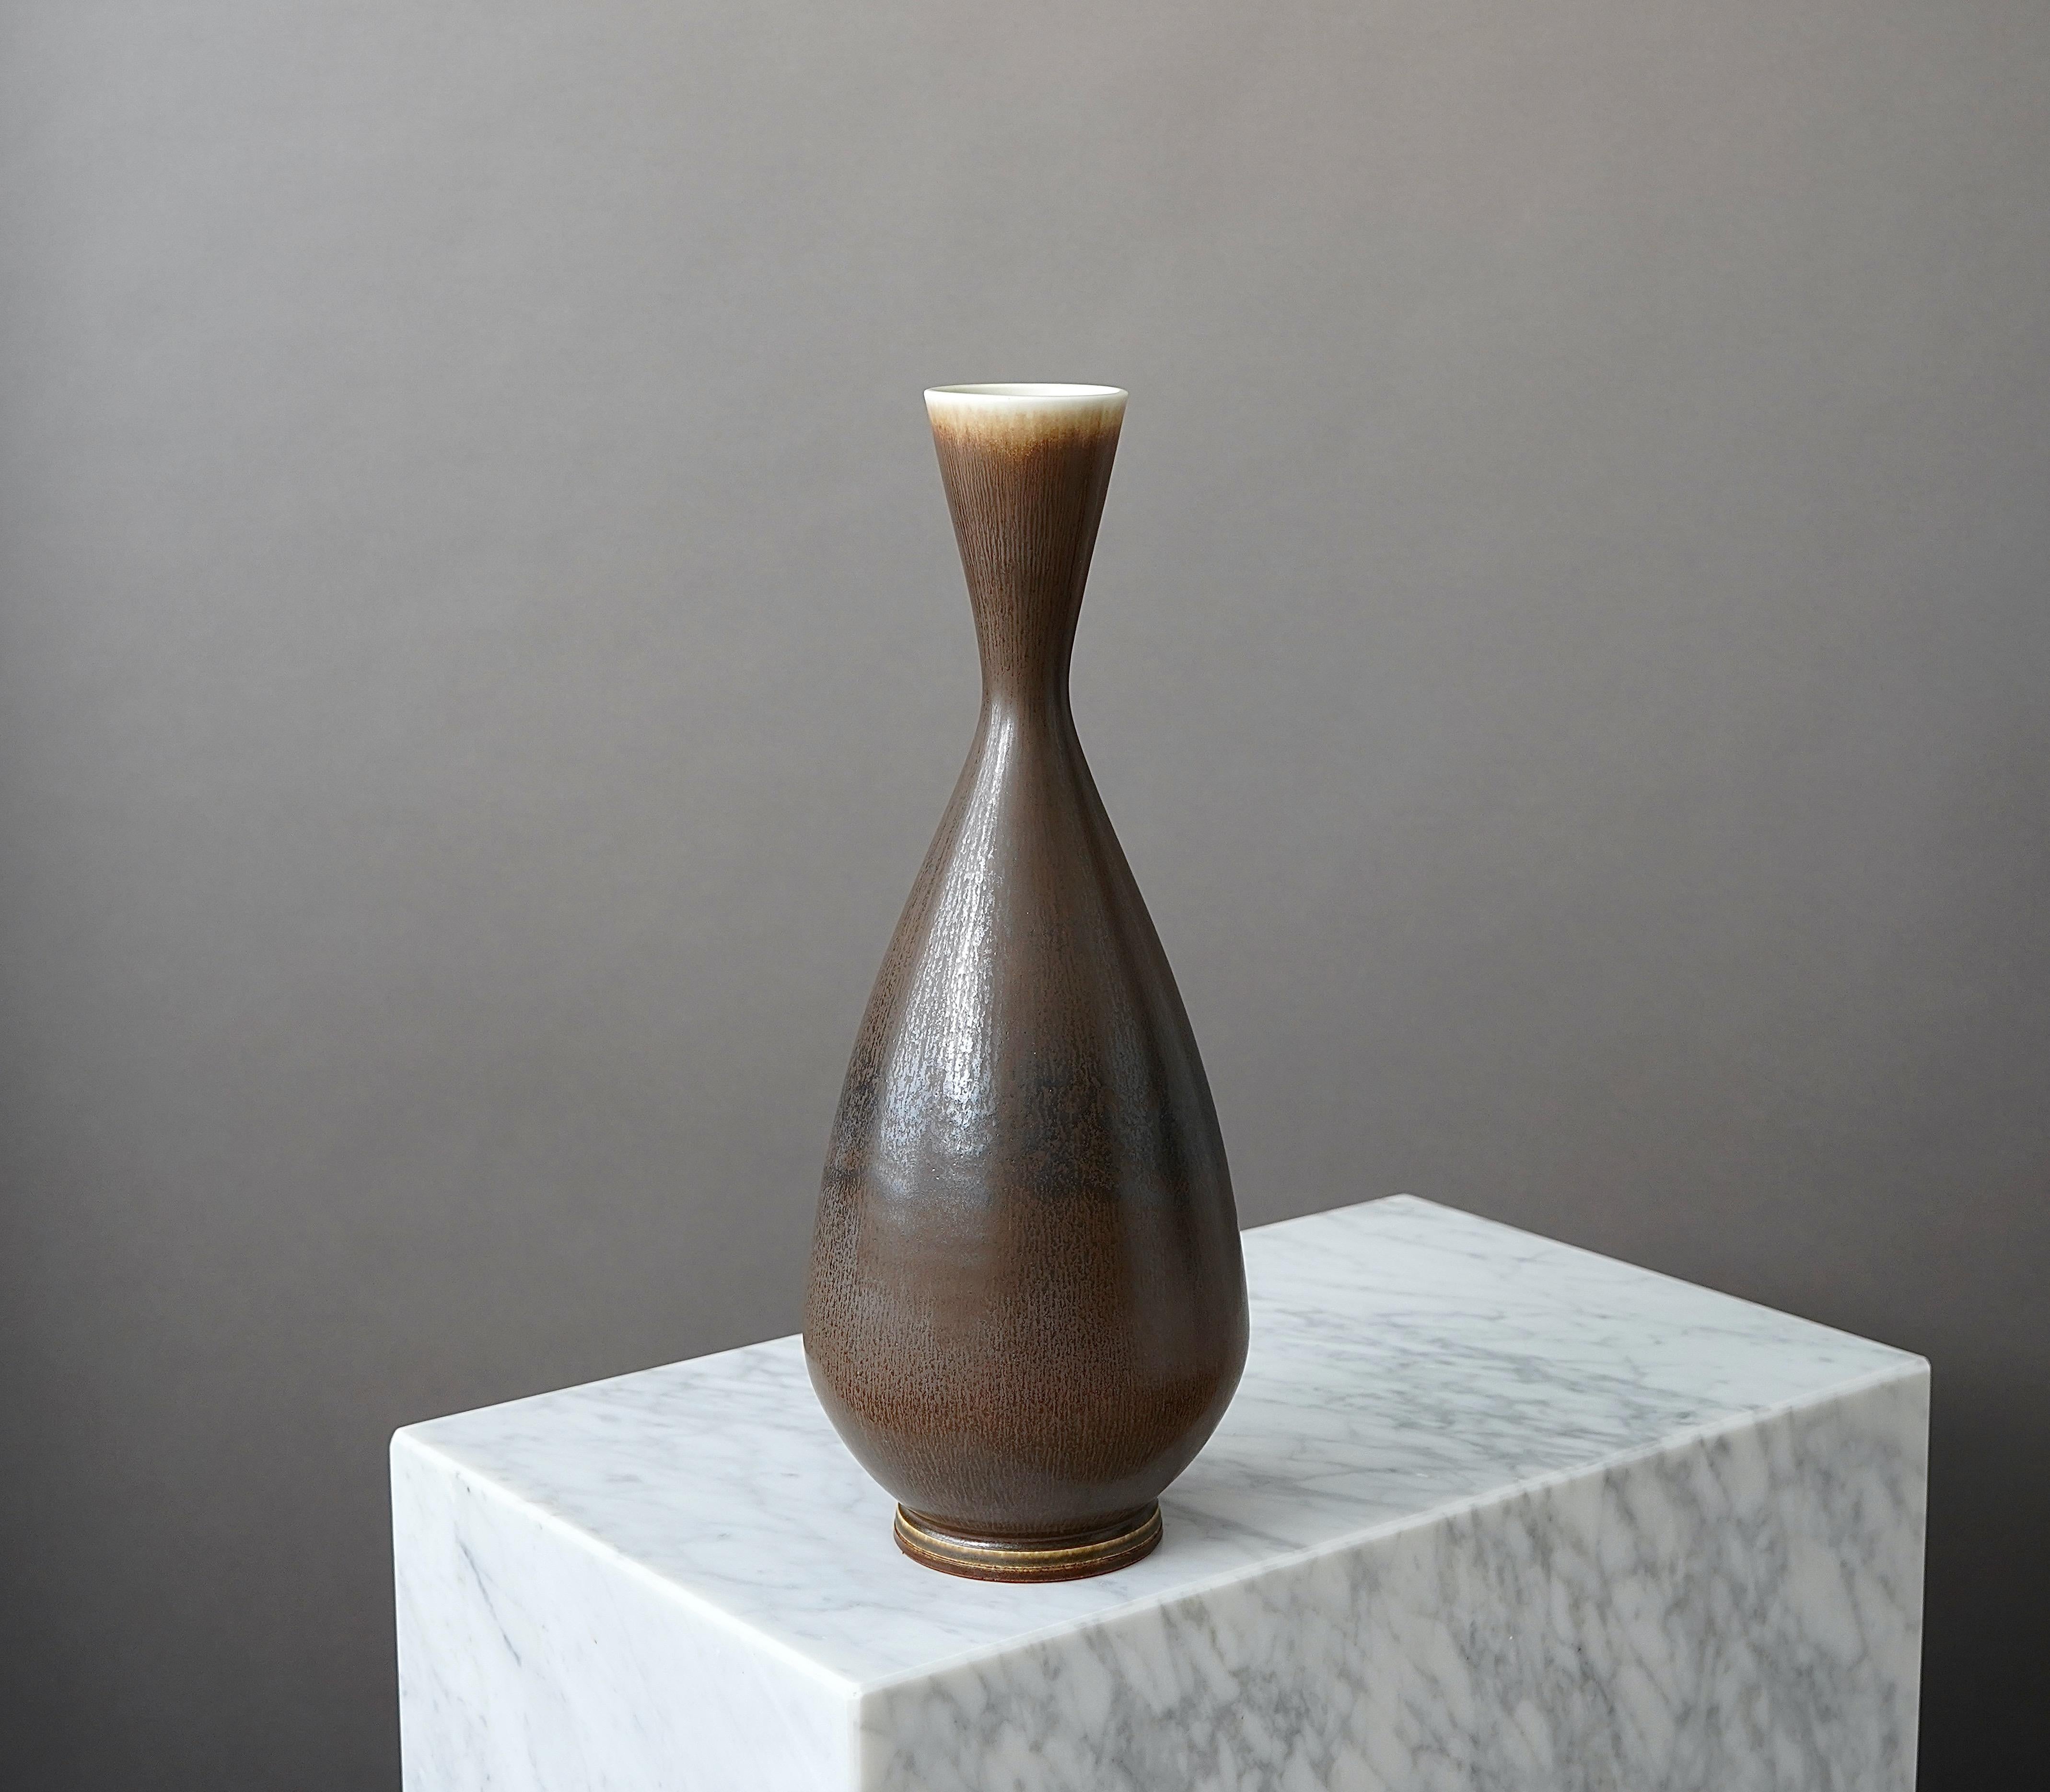 A large and beautiful stoneware vase with amazing hare’s fur glaze.
Made by master thrower Berndt Friberg, in the artist's studio at Gustavsberg, Sweden, 1963.

Great condition. 
Incised signature 